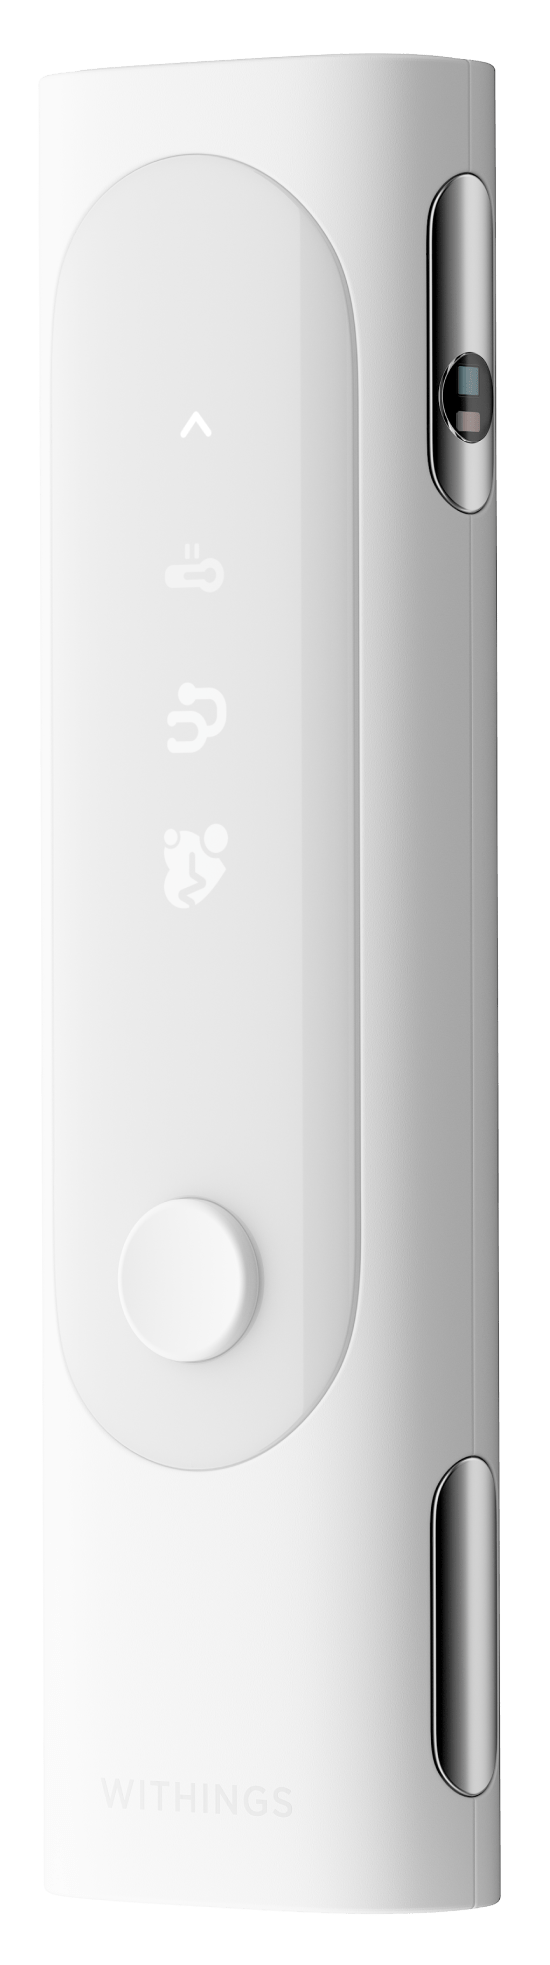 Withings Beam-O